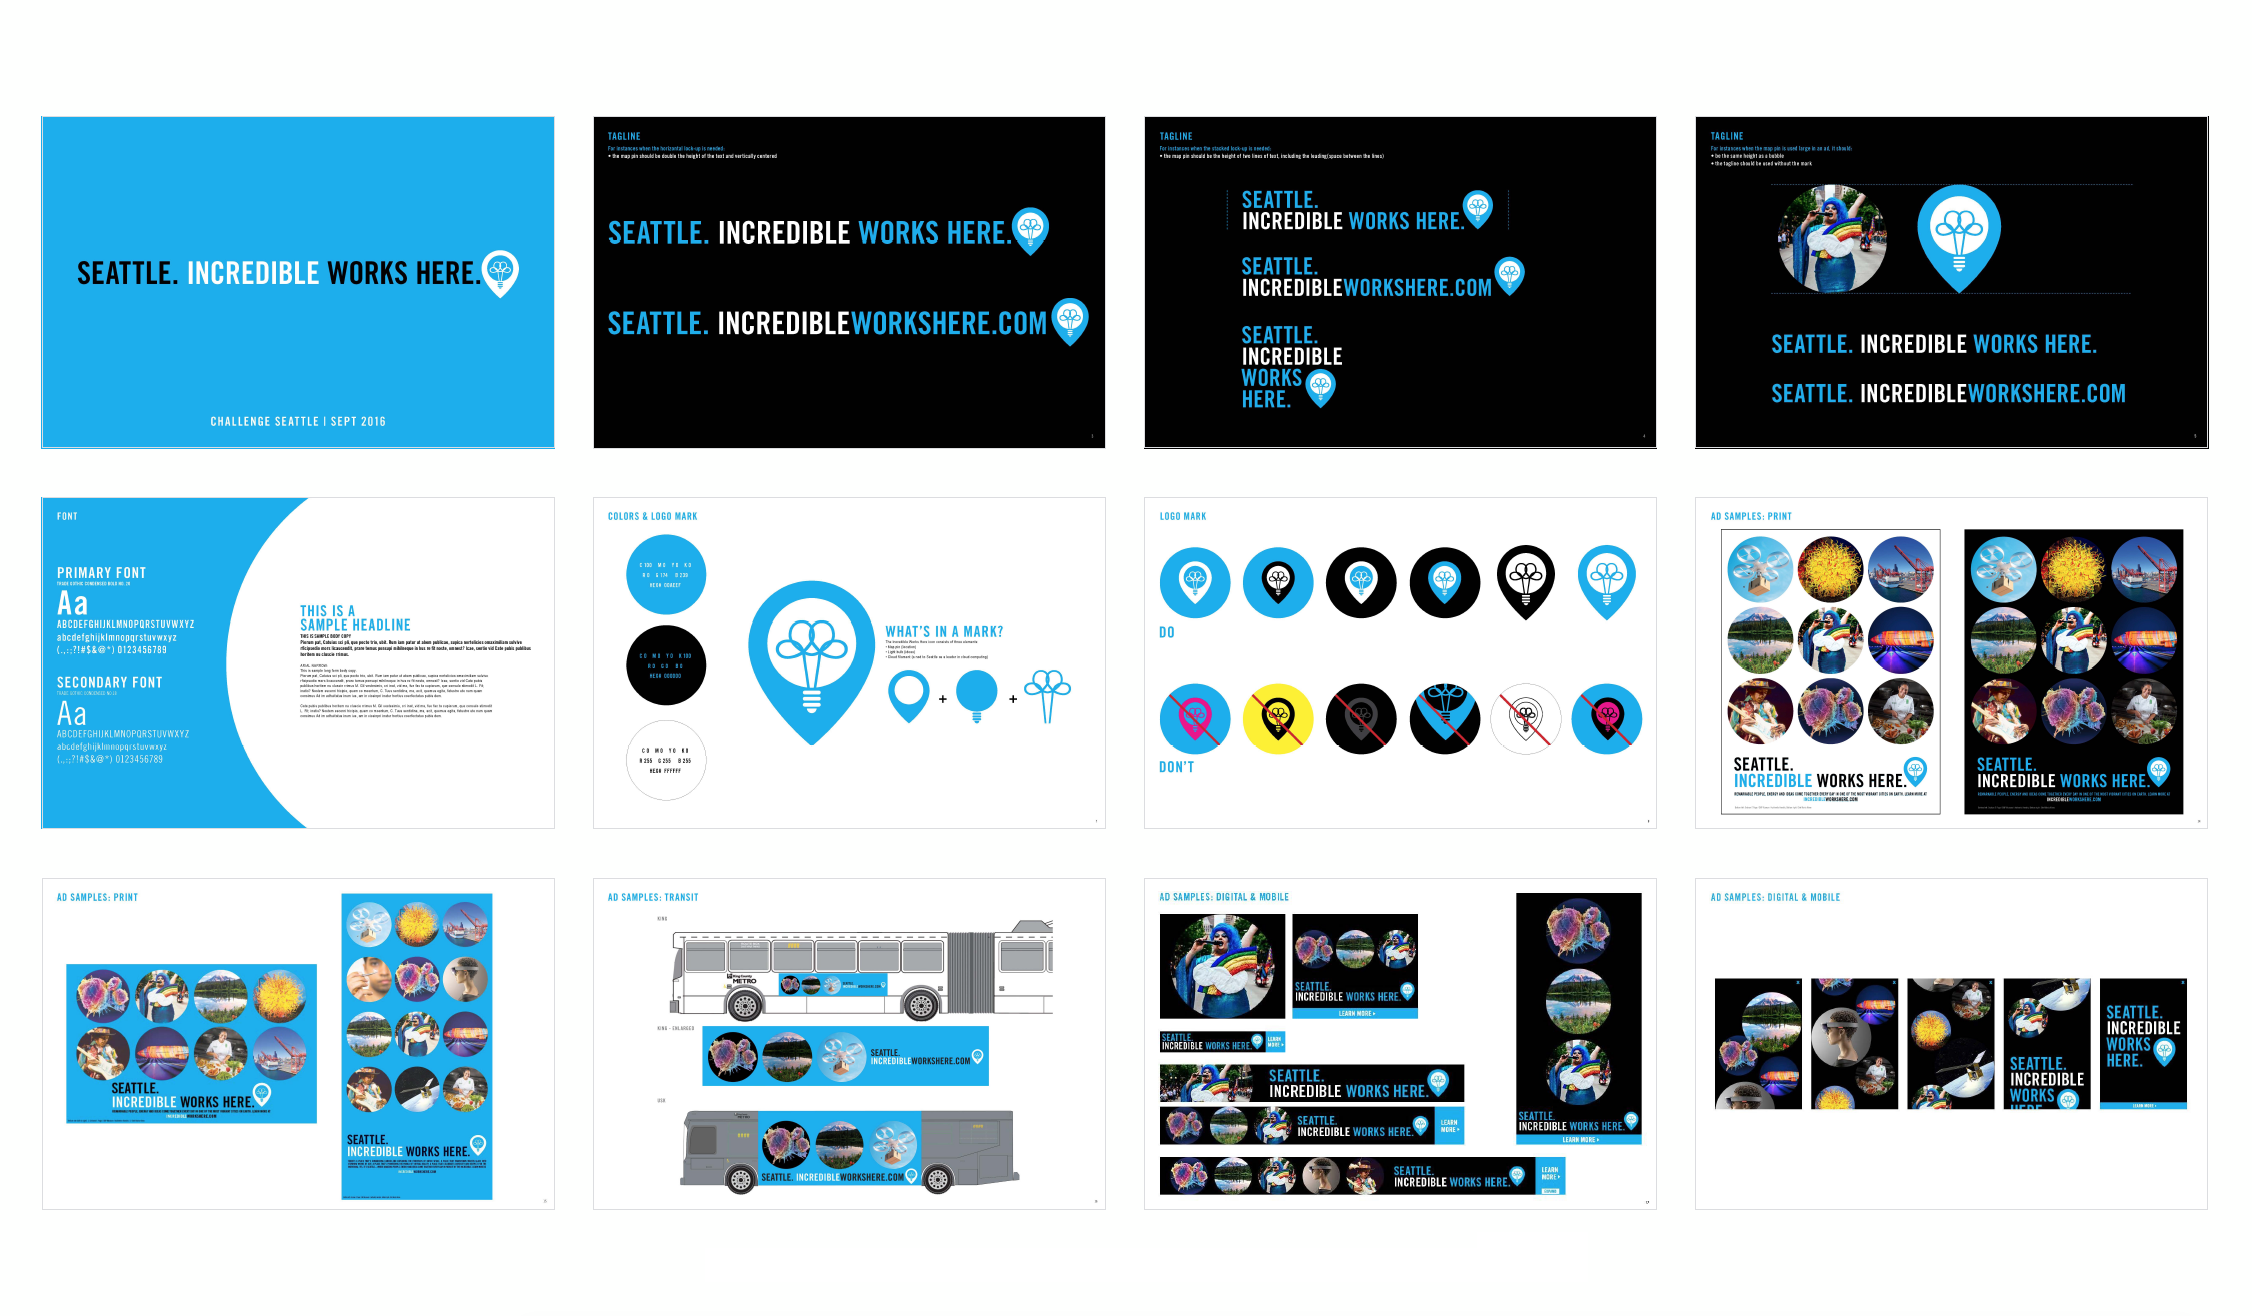  “Incredible Works Here” | Brand guidelines 